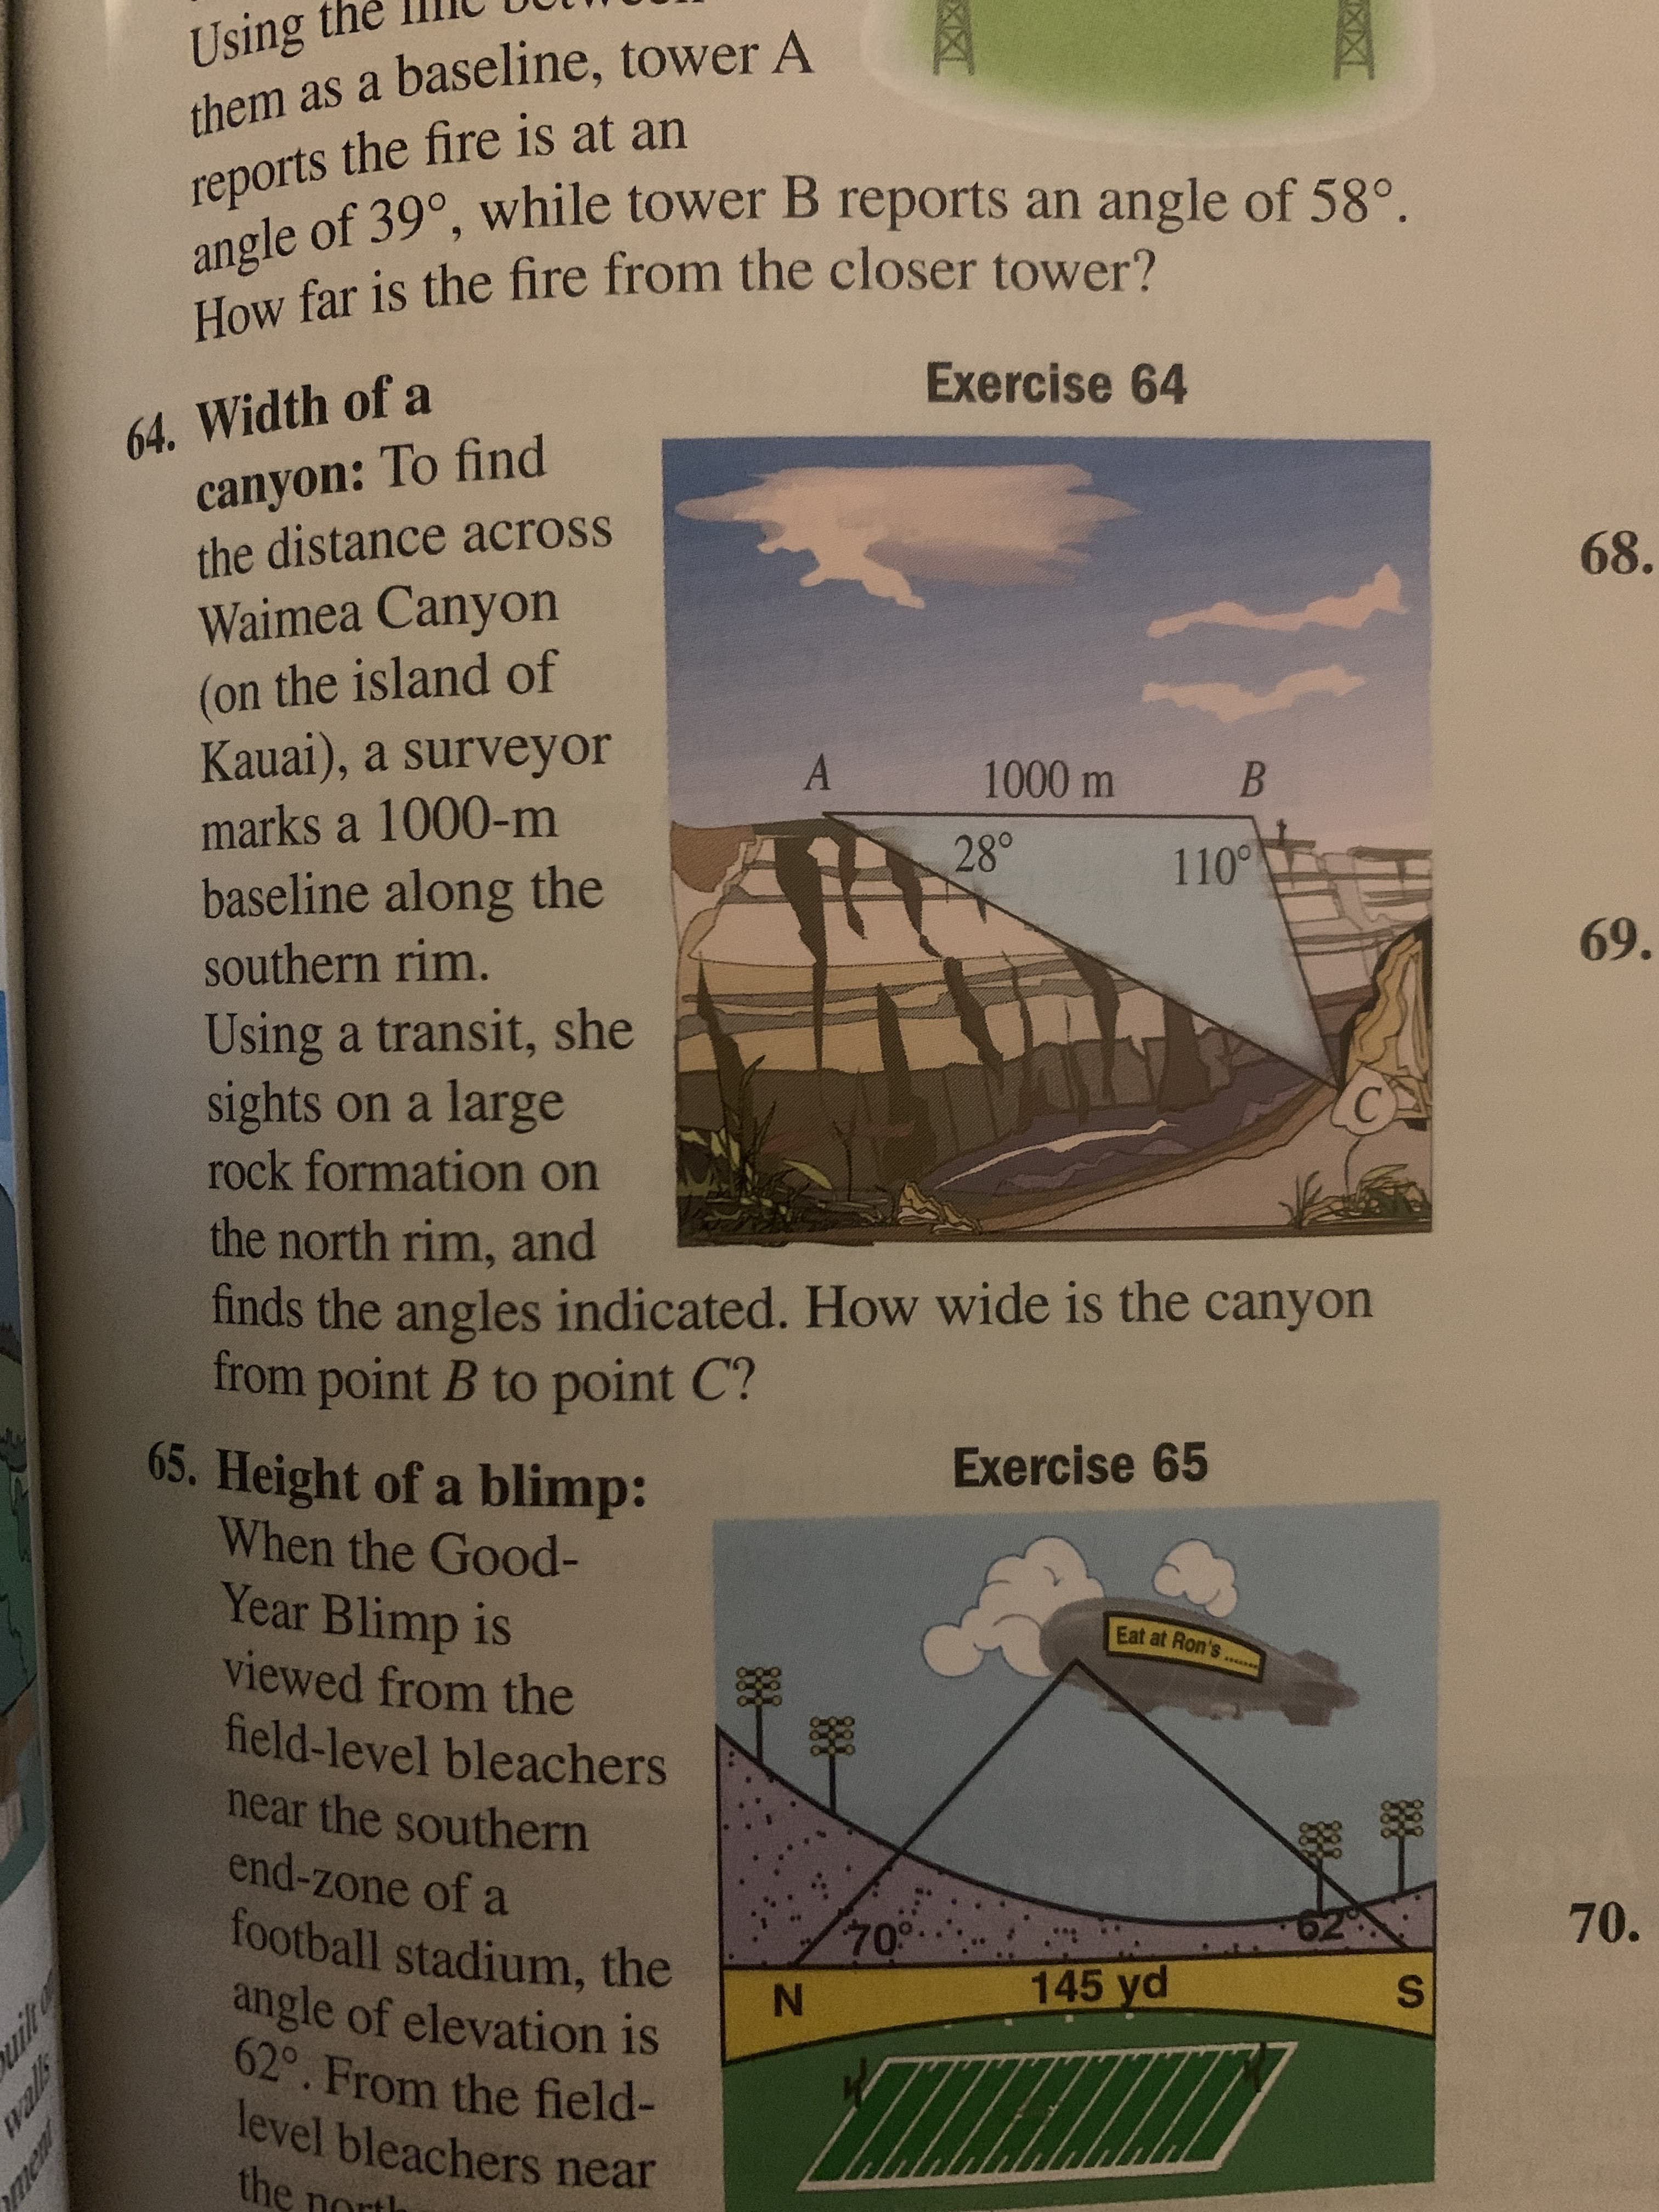 Using the
them as a baseline, tower A
reports the fire is at an
angle of 39°, while tower B reports an angle of 58°.
How far is the fire from the closer tower?
Exercise 64
64. Width of a
canyon: To find
the distance across
68.
Waimea Canyon
(on the island of
Kauai), a surveyor
marks a 1000-m
1000 m
28°
110°
baseline along the
69.
southern rim.
Using a transit, she
sights on a large
rock formation on
the north rim, and
finds the angles indicated. How wide is the canyon
from point B to point C?
65. Height of a blimp:
When the Good-
Year Blimp is
viewed from the
field-level bleachers
Exercise 65
Eat at Ron's
near the southern
end-zone of a
football stadium, the
angle of elevation is
62°. From the field-
level bleachers near
the north
70°.
70.
145 yd
S.
IN
